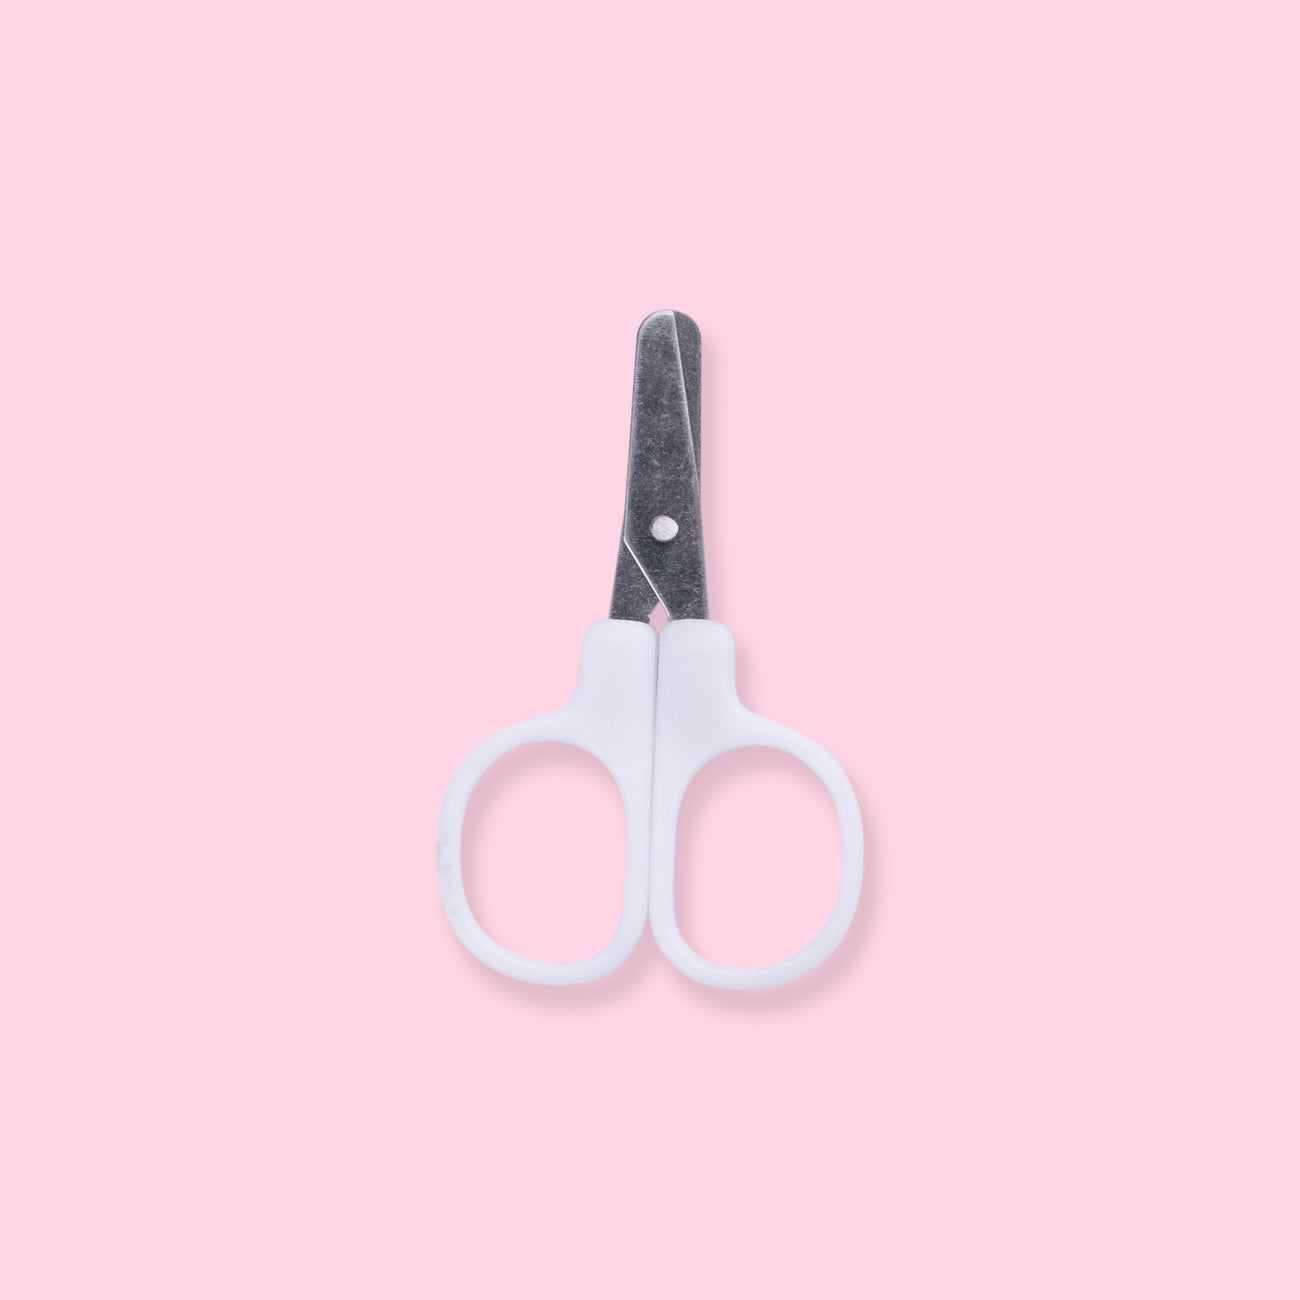 Mini White Color Scissor INS Style Portable Stainless Steel Blade Cutter  for Paper Handwork Stationery Office School Gift A6676